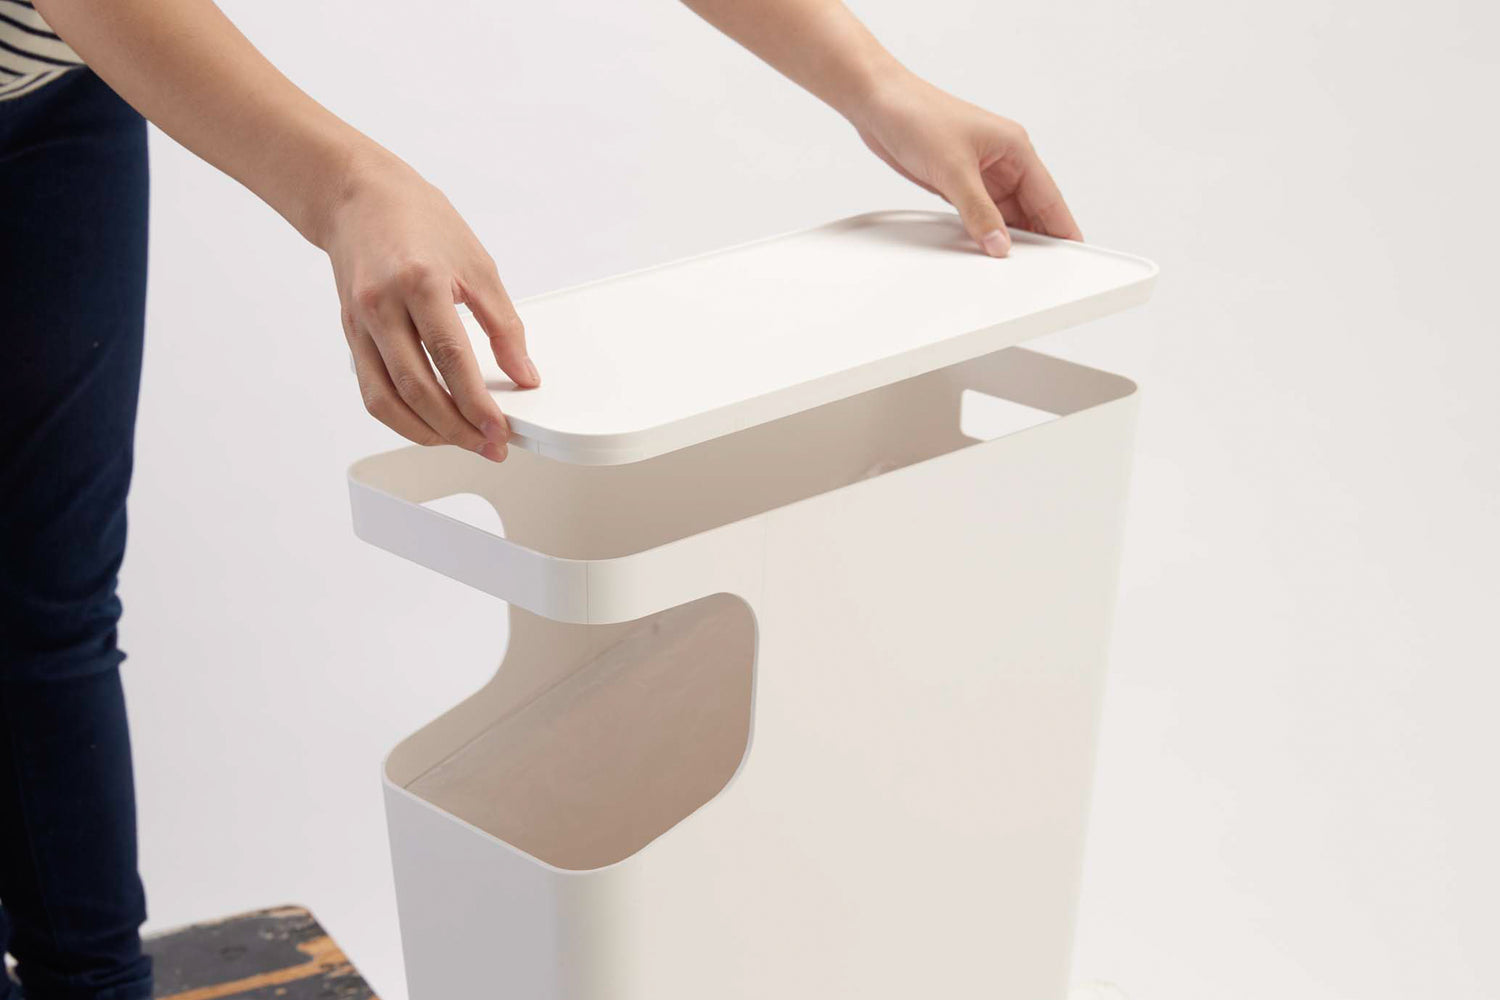 View 4 - White Side Table Trash Can with lid removed on white background by Yamazaki Home.